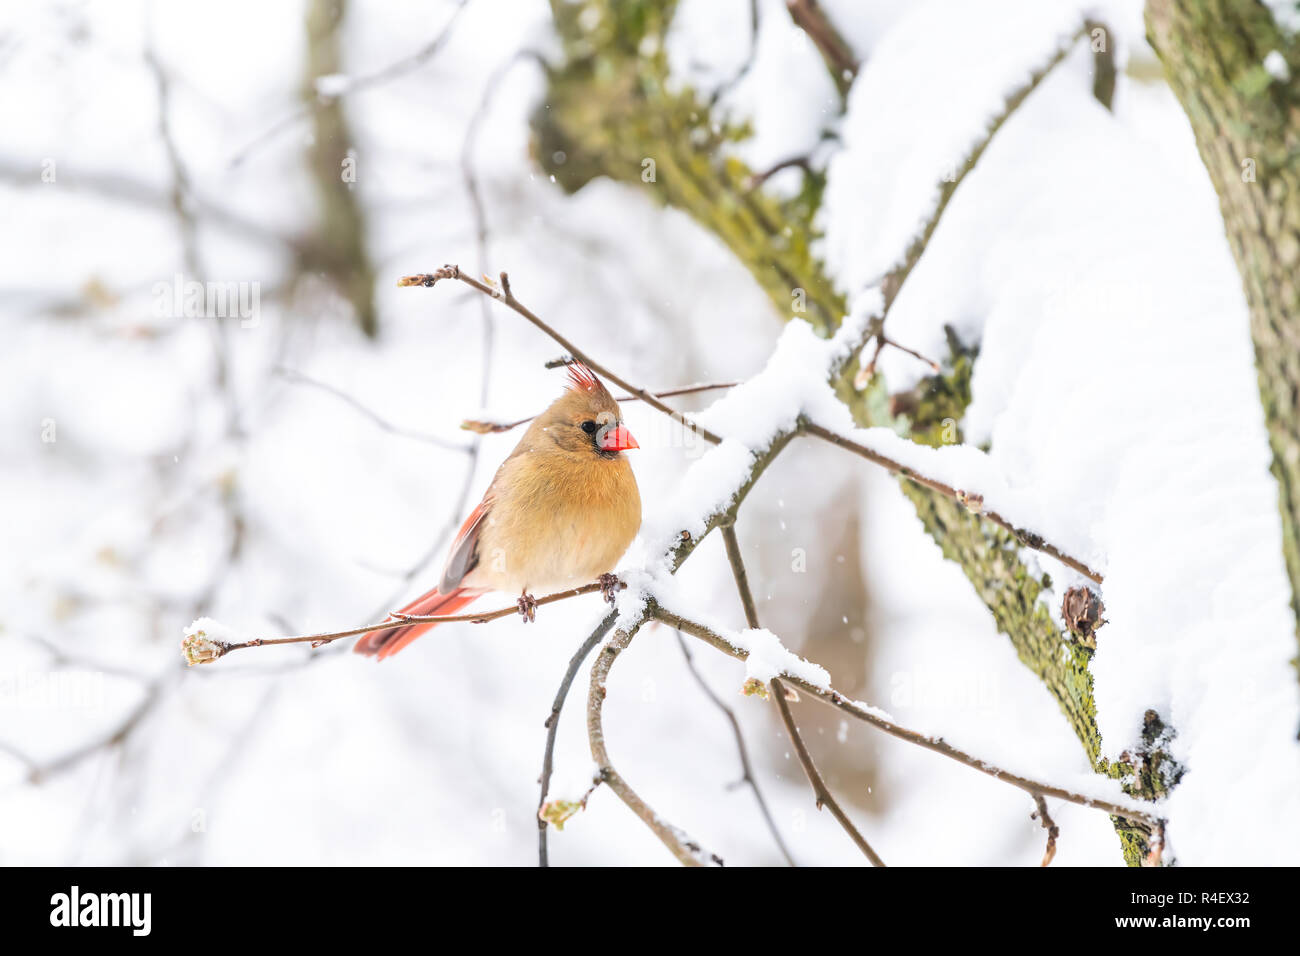 Closeup of one fluffed, puffed up orange, red female cardinal bird side, perched on sakura, cherry tree branch, covered in falling snow with buds duri Stock Photo